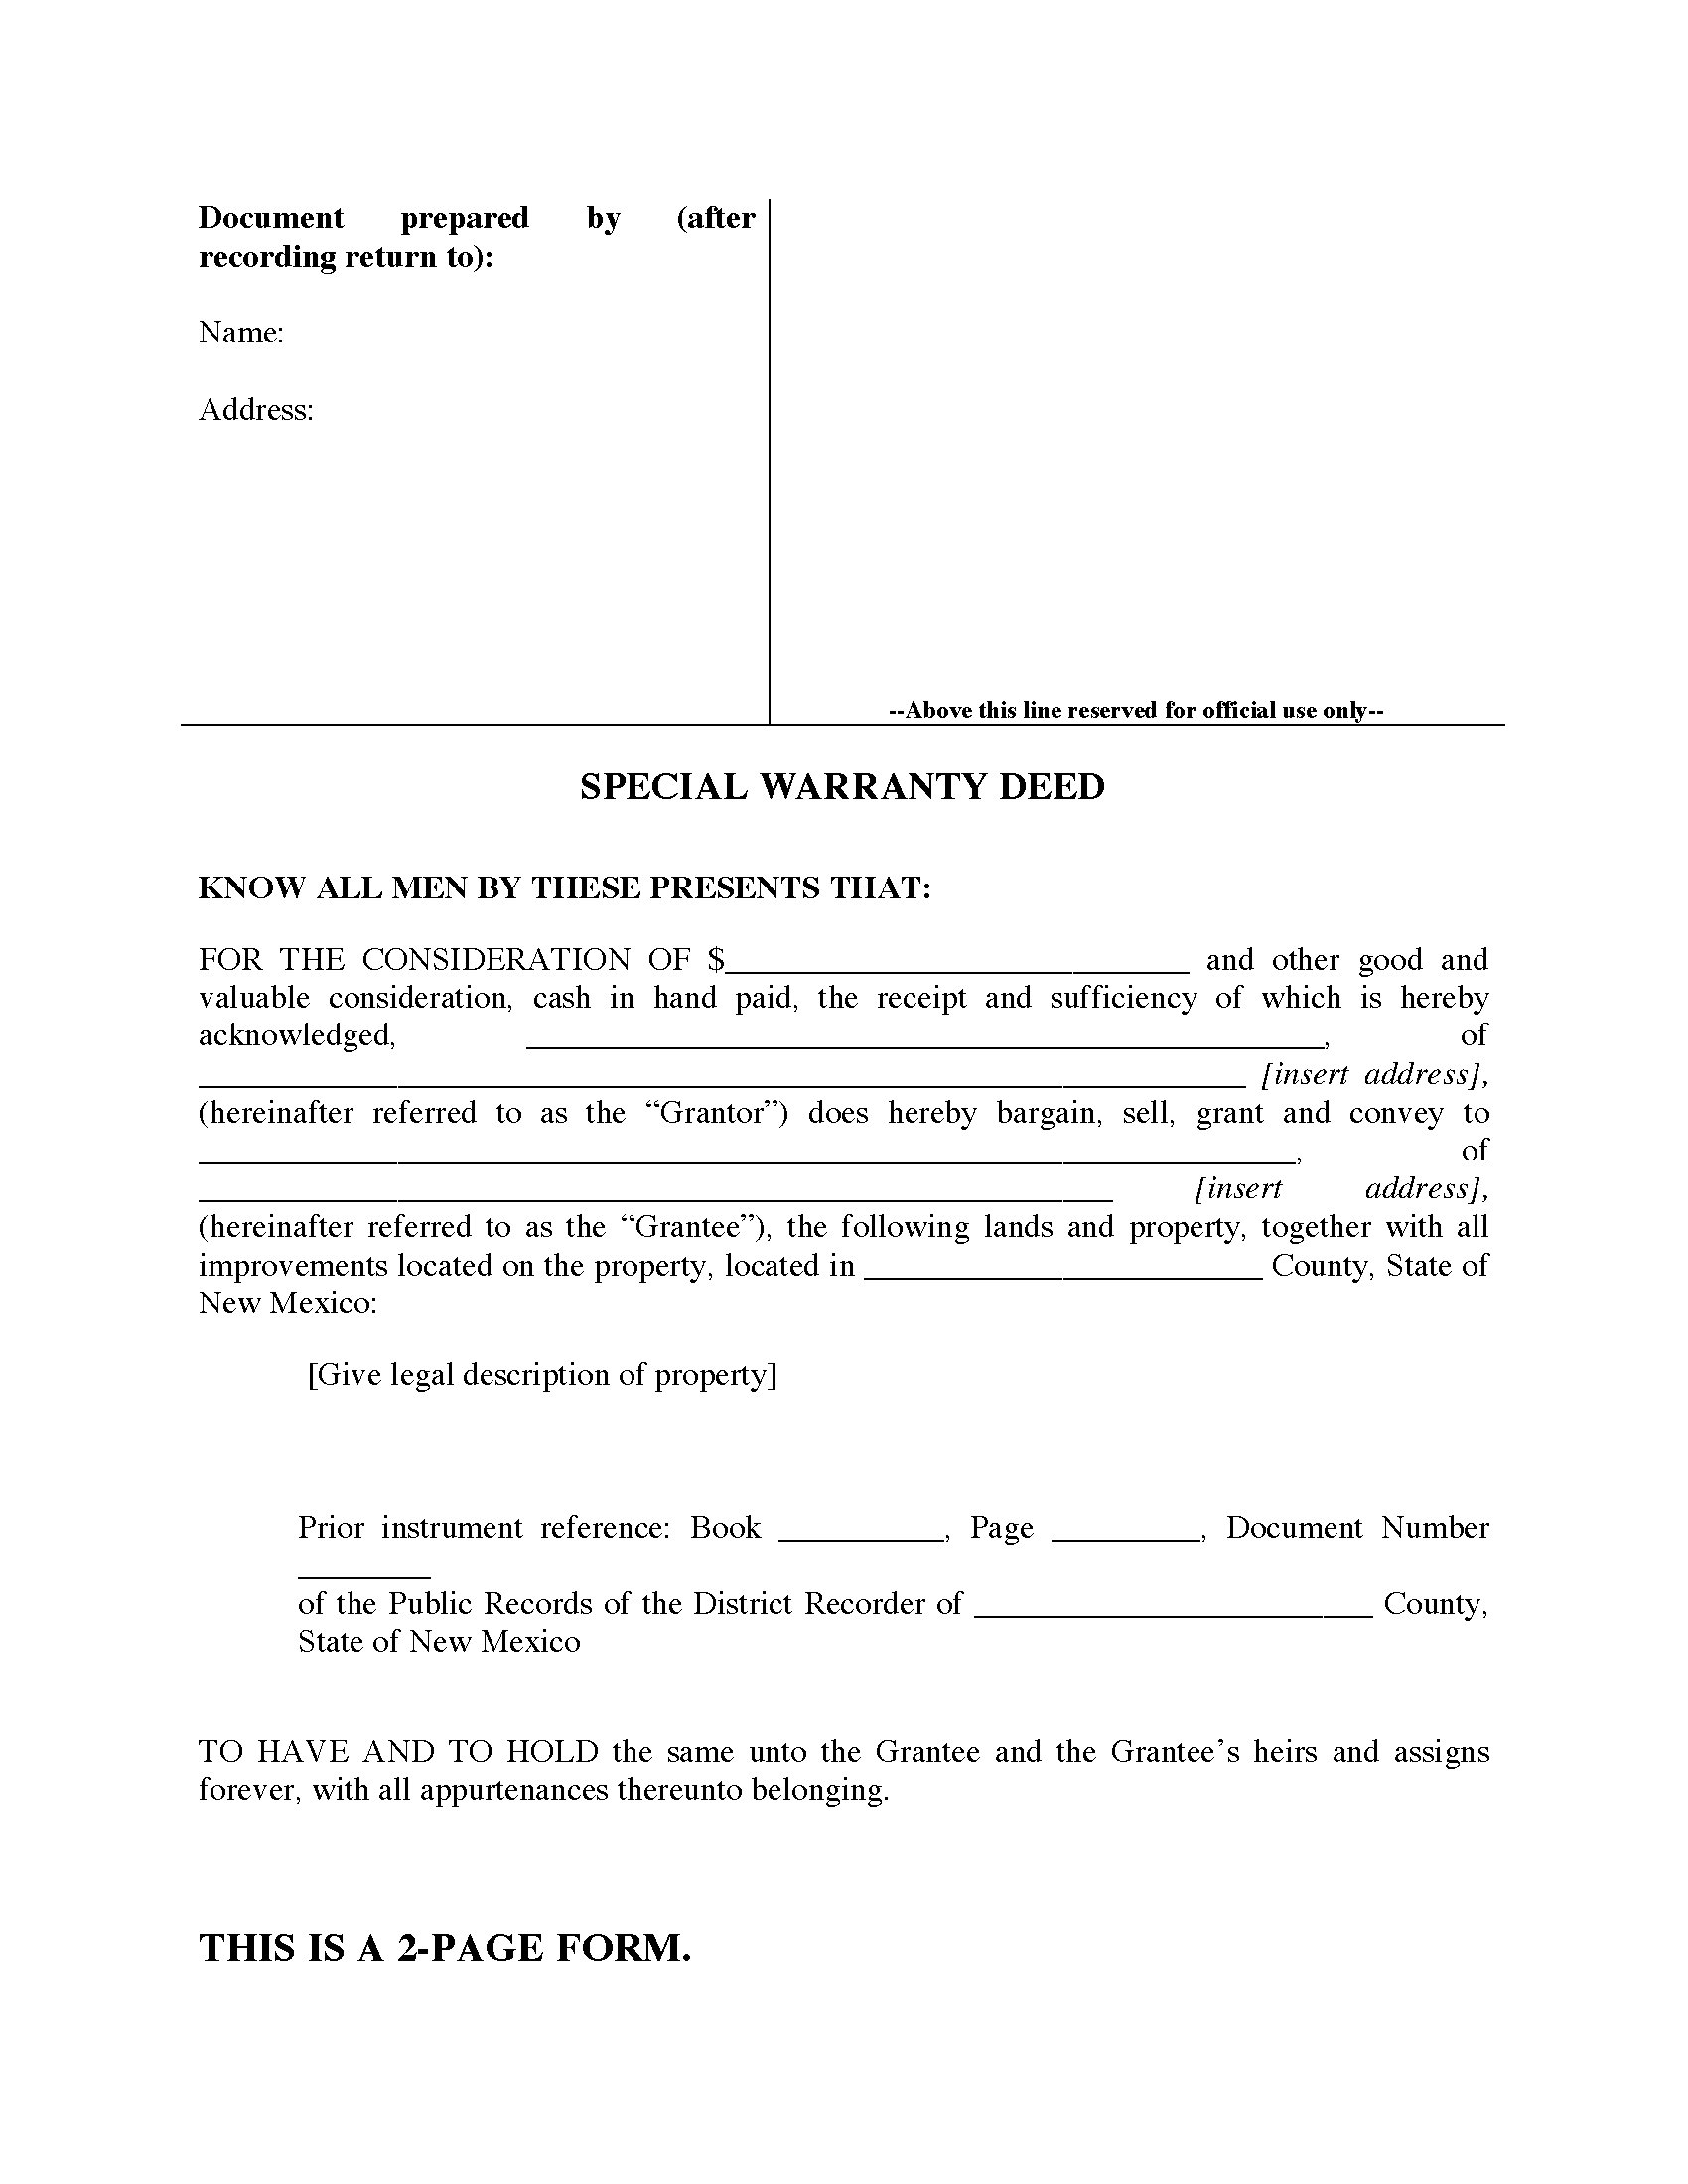 New Mexico Special Warranty Deed Legal Forms And Business Templates Megadox Com